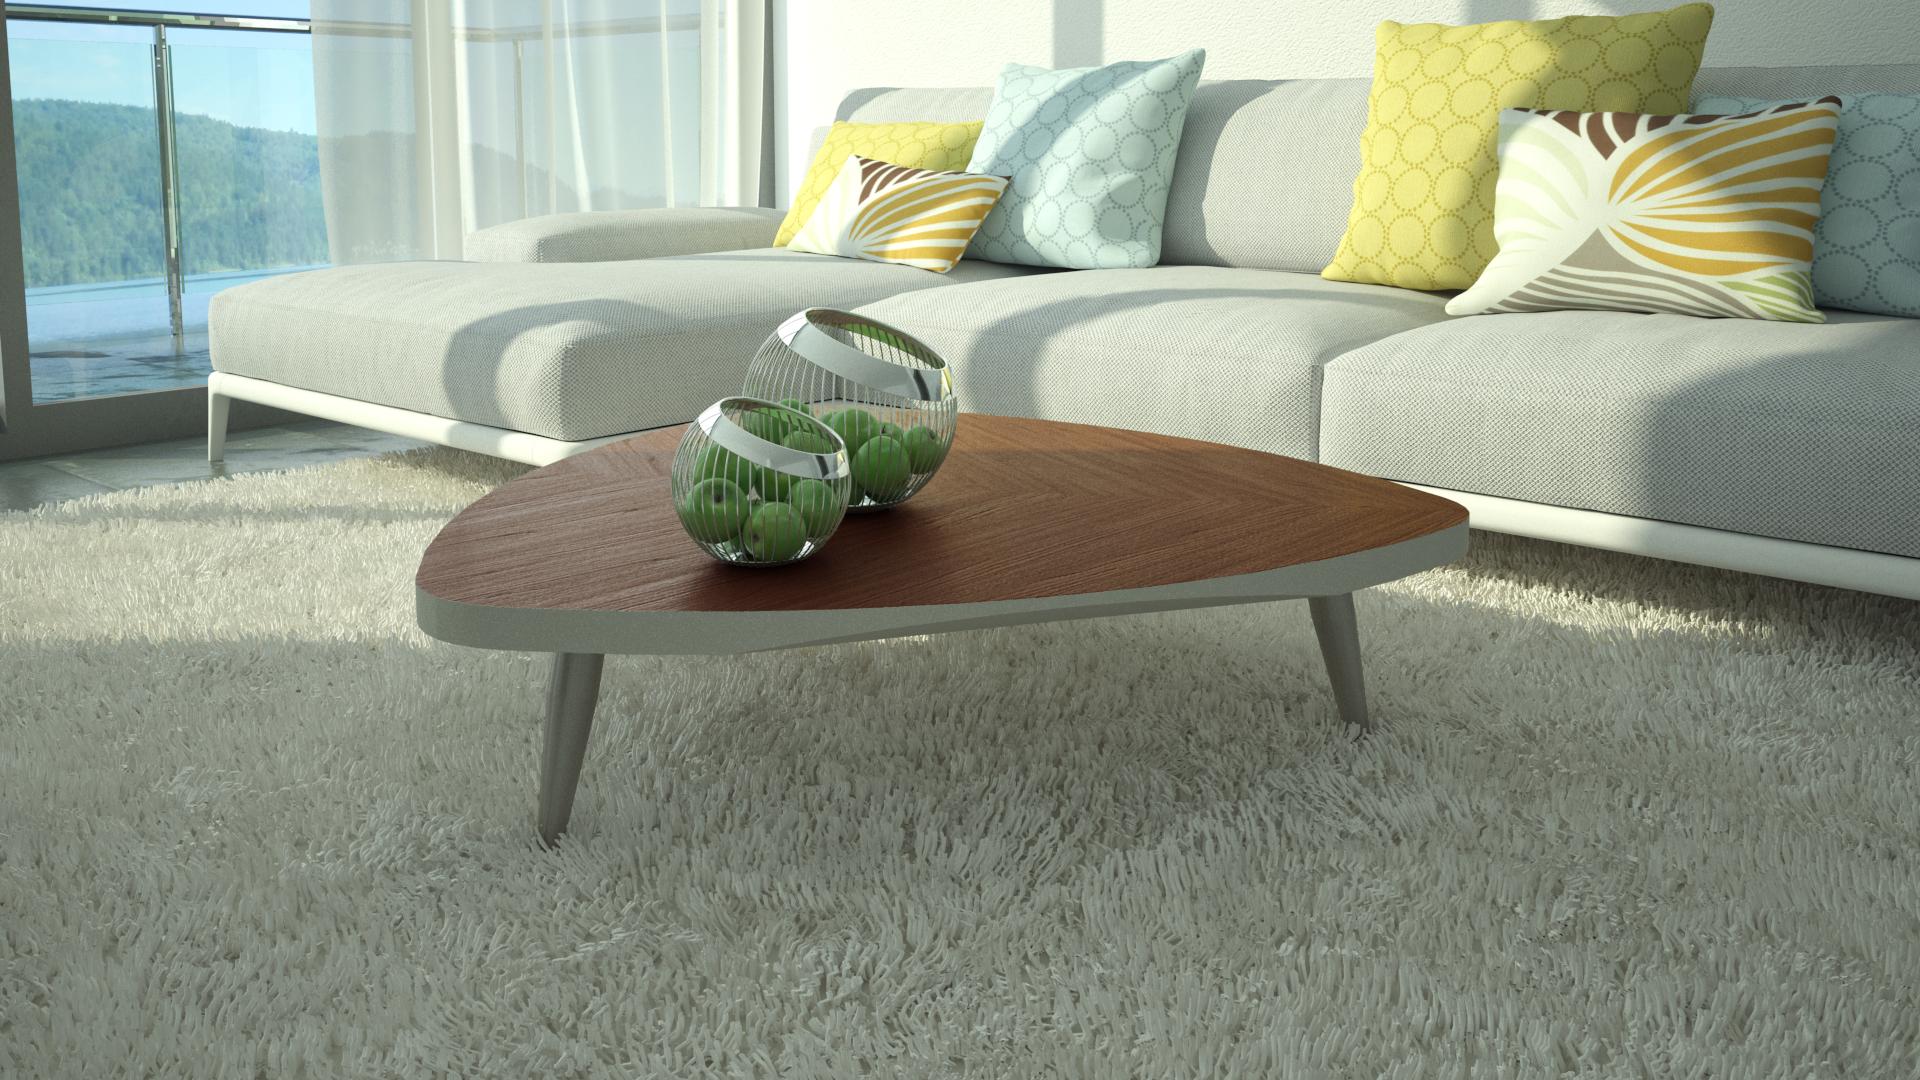 At Home USA Googie Coffee Table